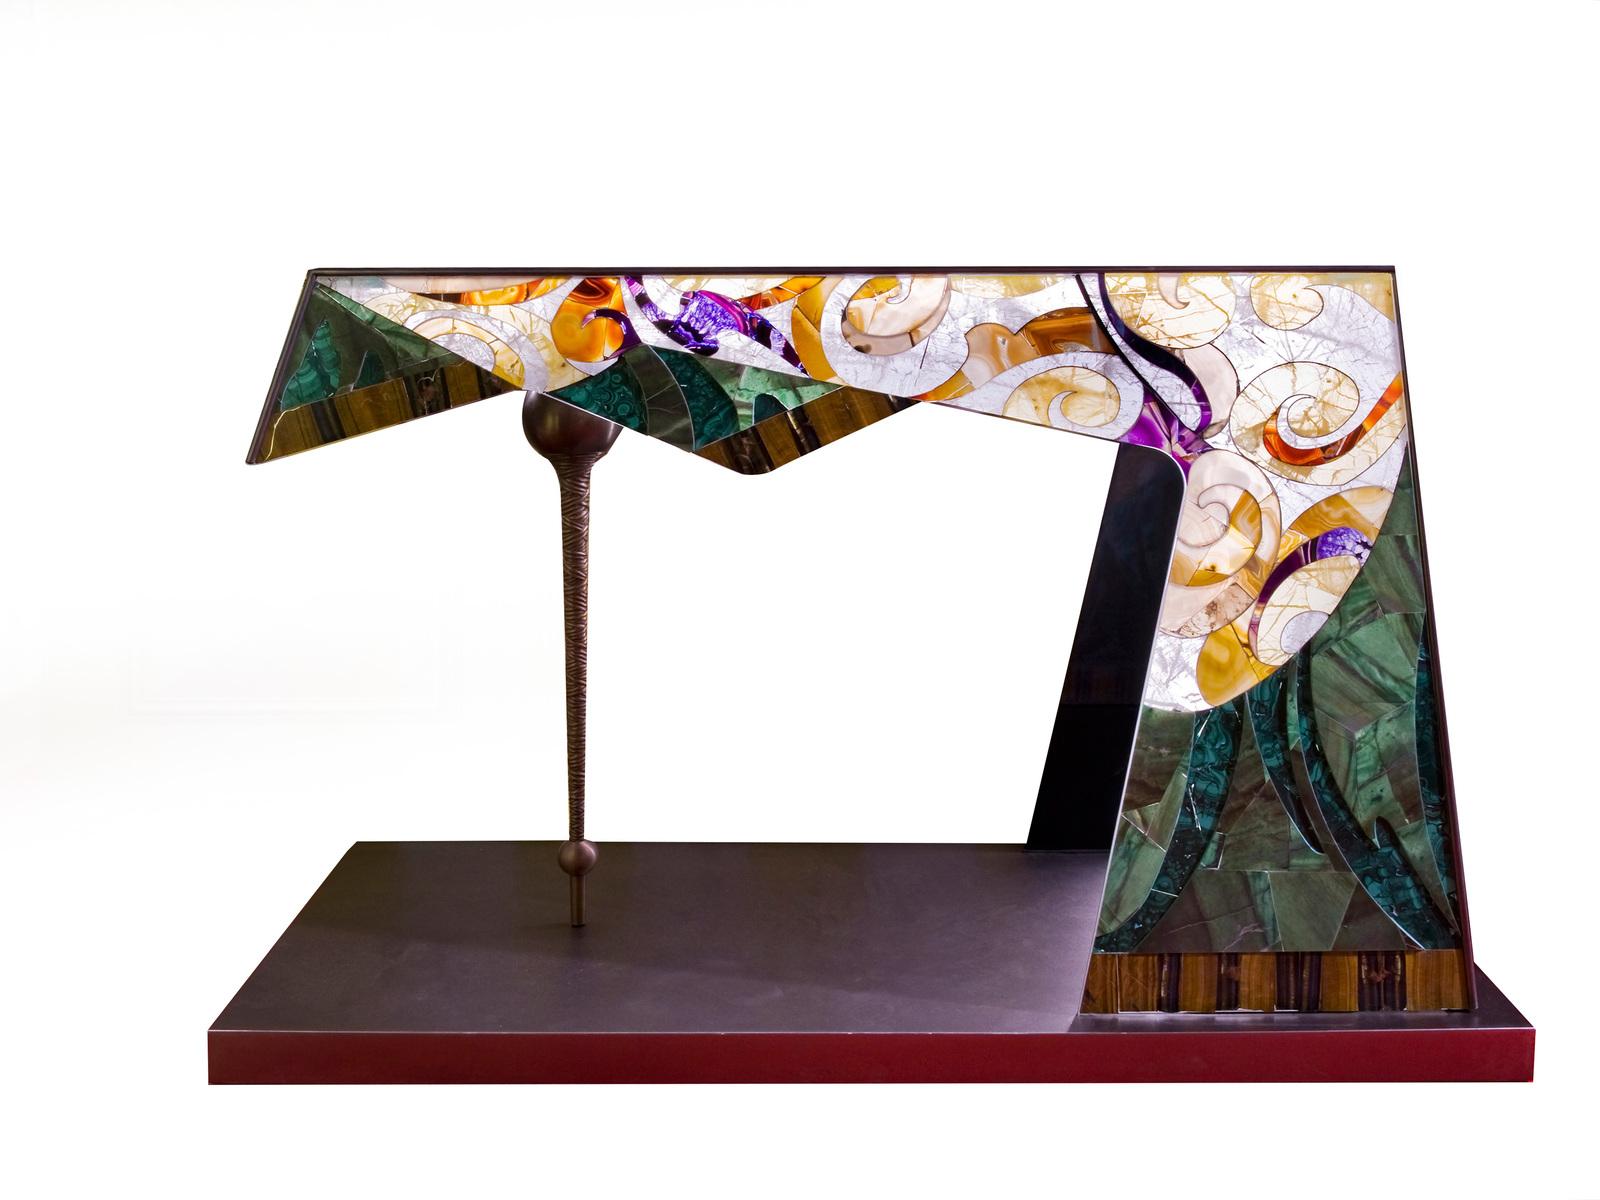 This one-of-a-kind console will create a mesmerizing focal point in an entryway or living room, in an eclectic and modern decor. The unstructured, geometric Silhouette is crafted of glass covered with a mosaic of semi-precious stones: malachite,